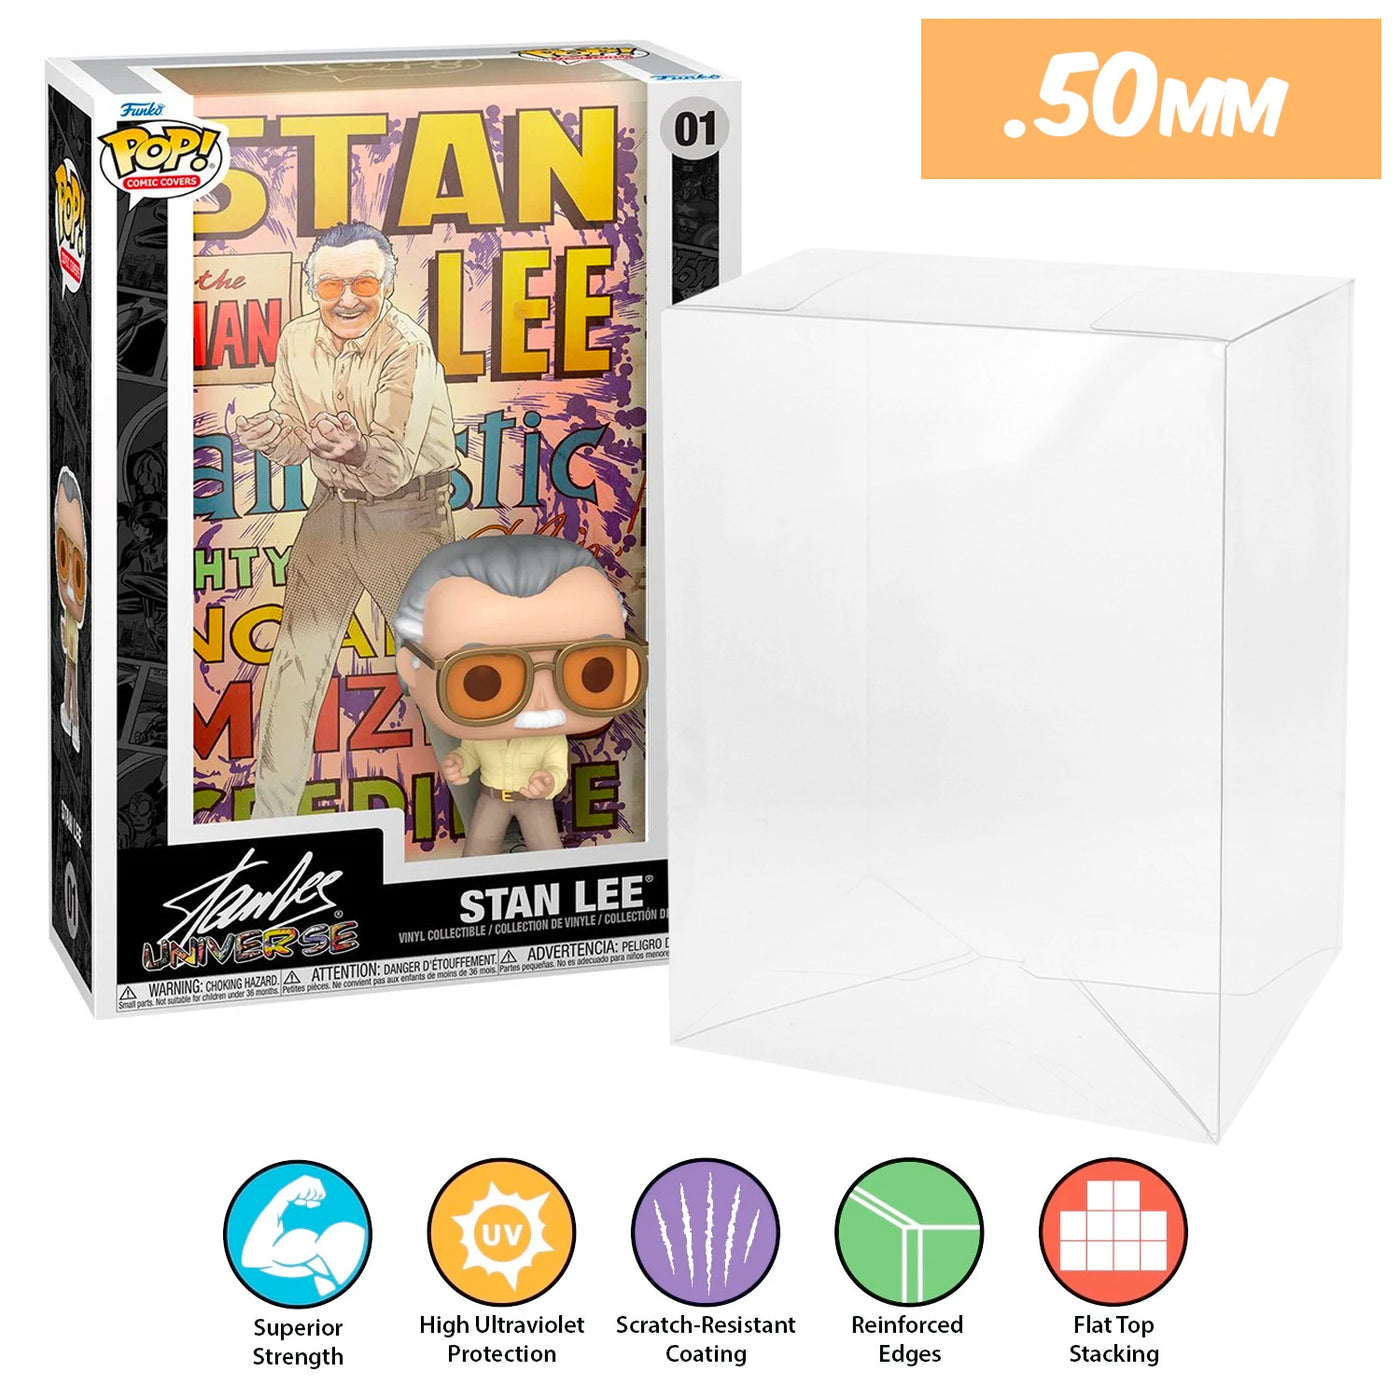 stan lee universe pop comic covers best funko pop protectors thick strong uv scratch flat top stack vinyl display geek plastic shield vaulted eco armor fits collect protect display case kollector protector